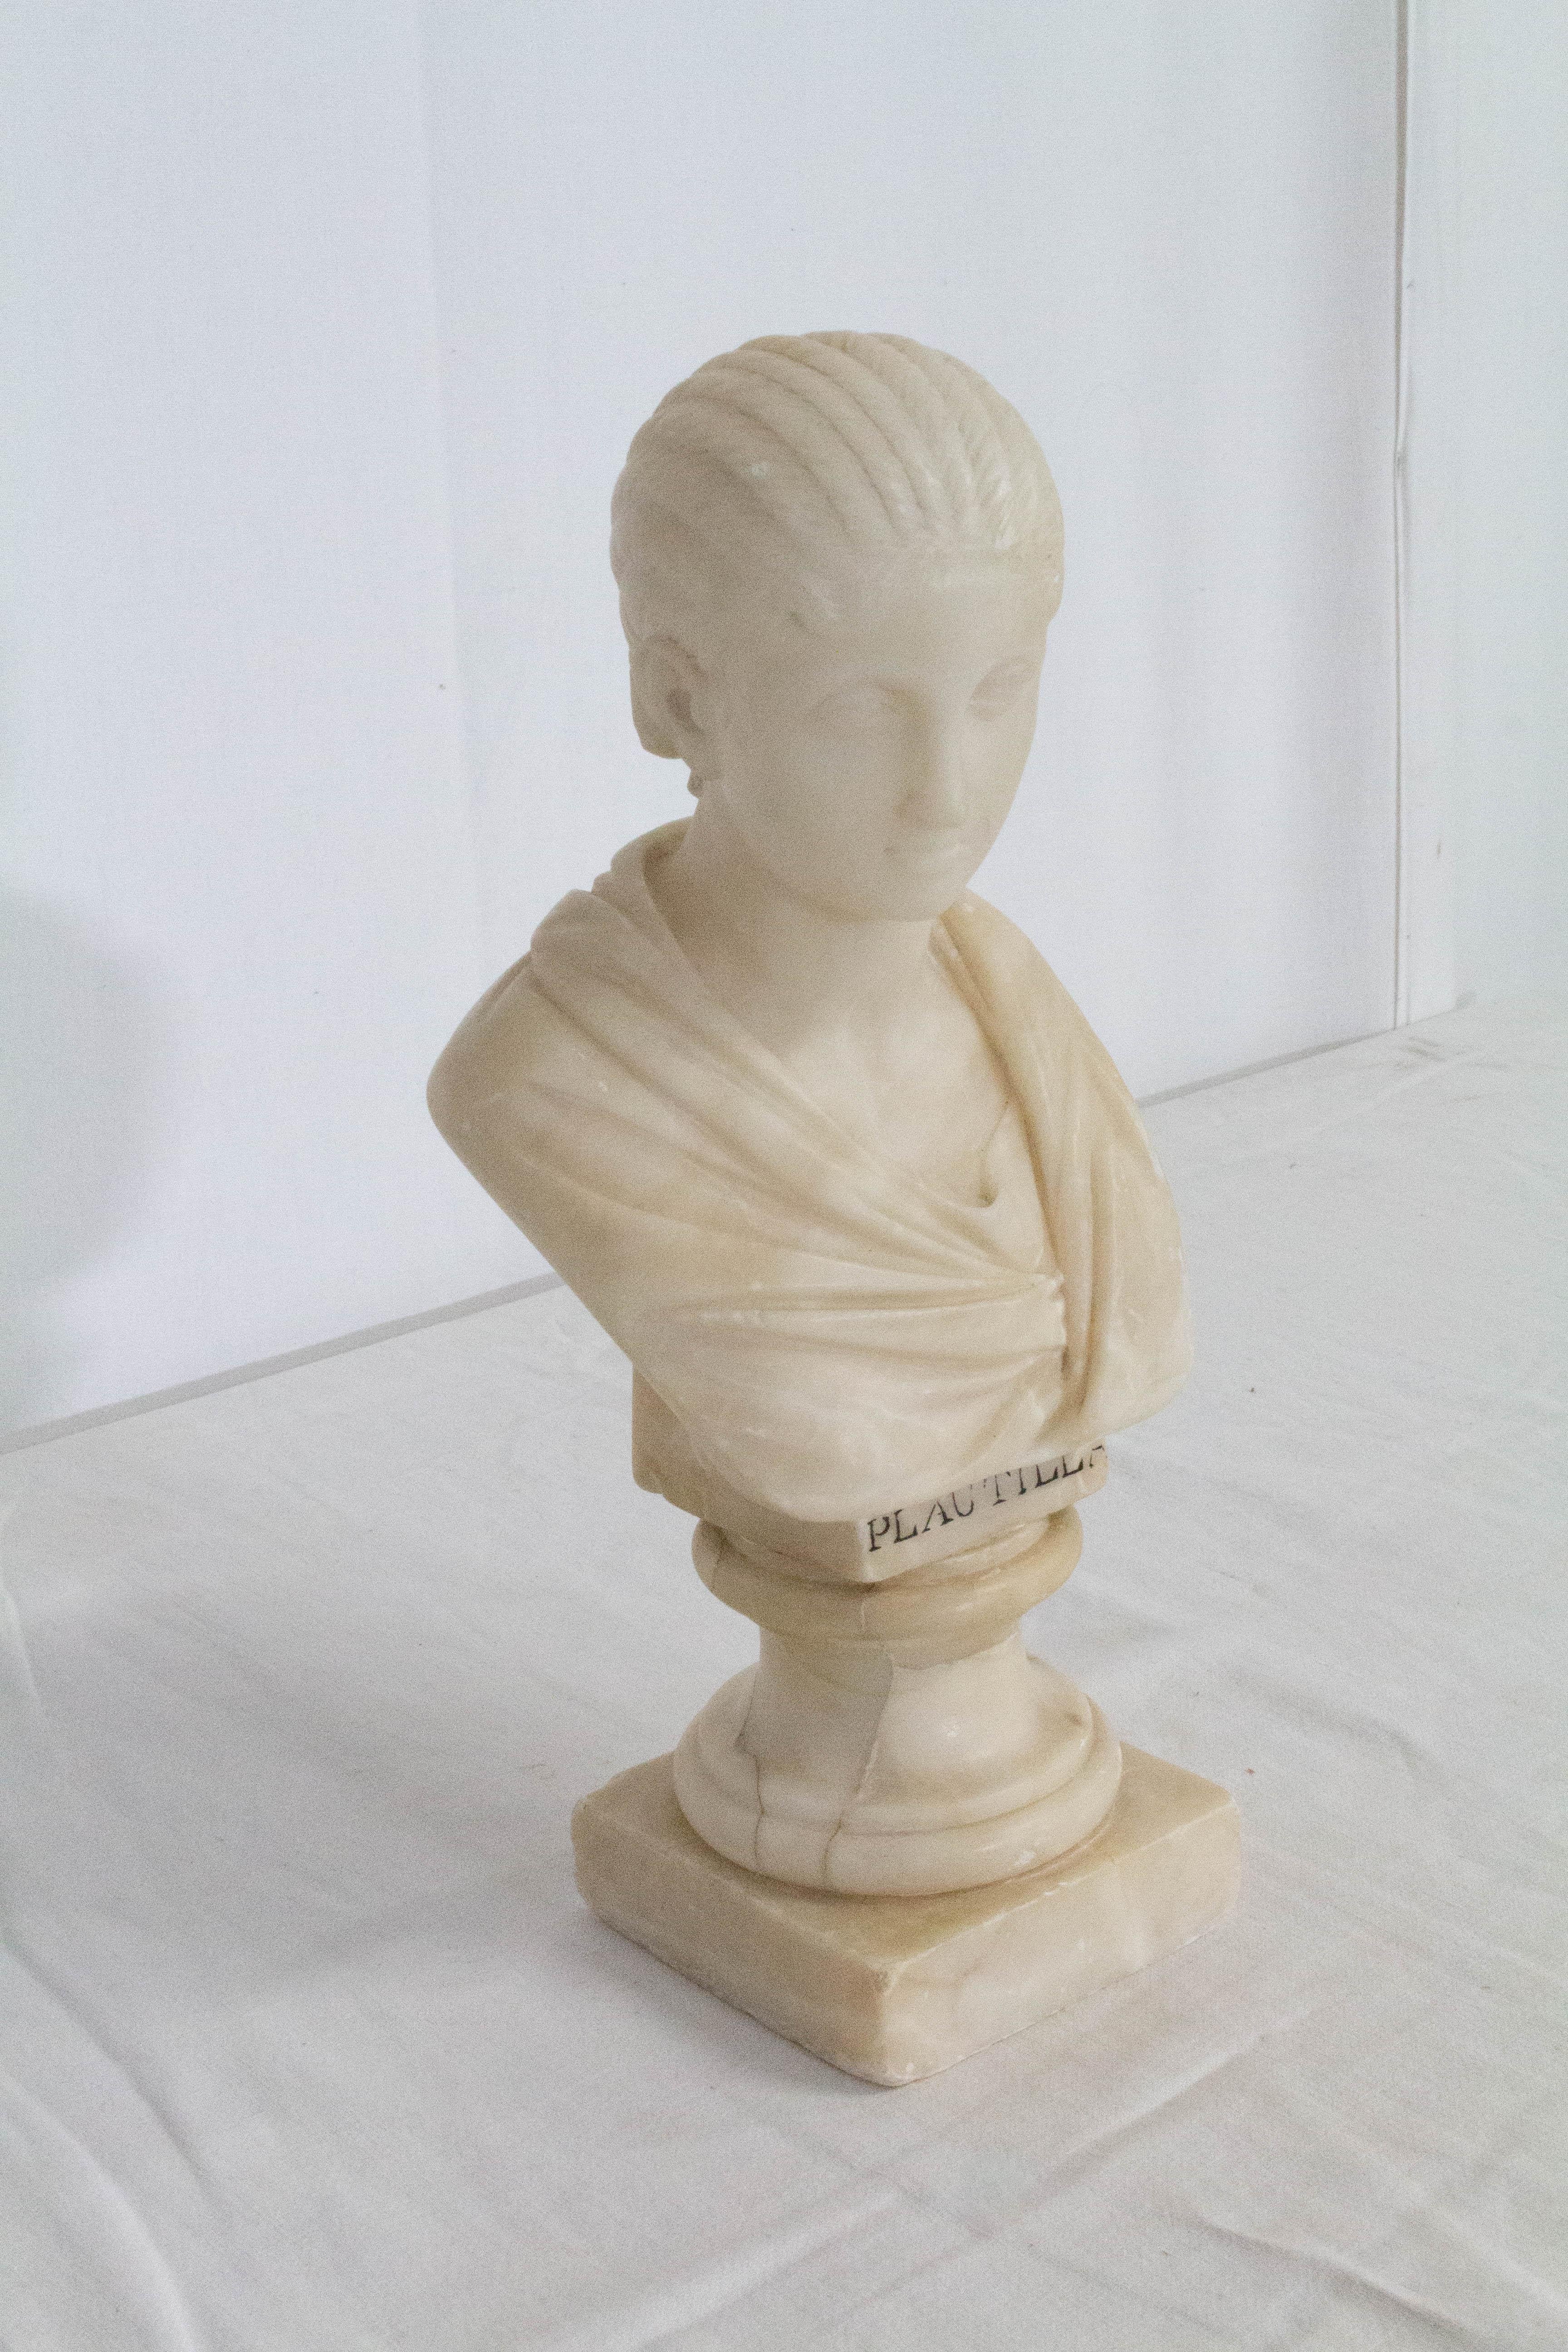 French Art Deco Albaster Plautilla Bust Neoclassic, Early 20th Century For Sale